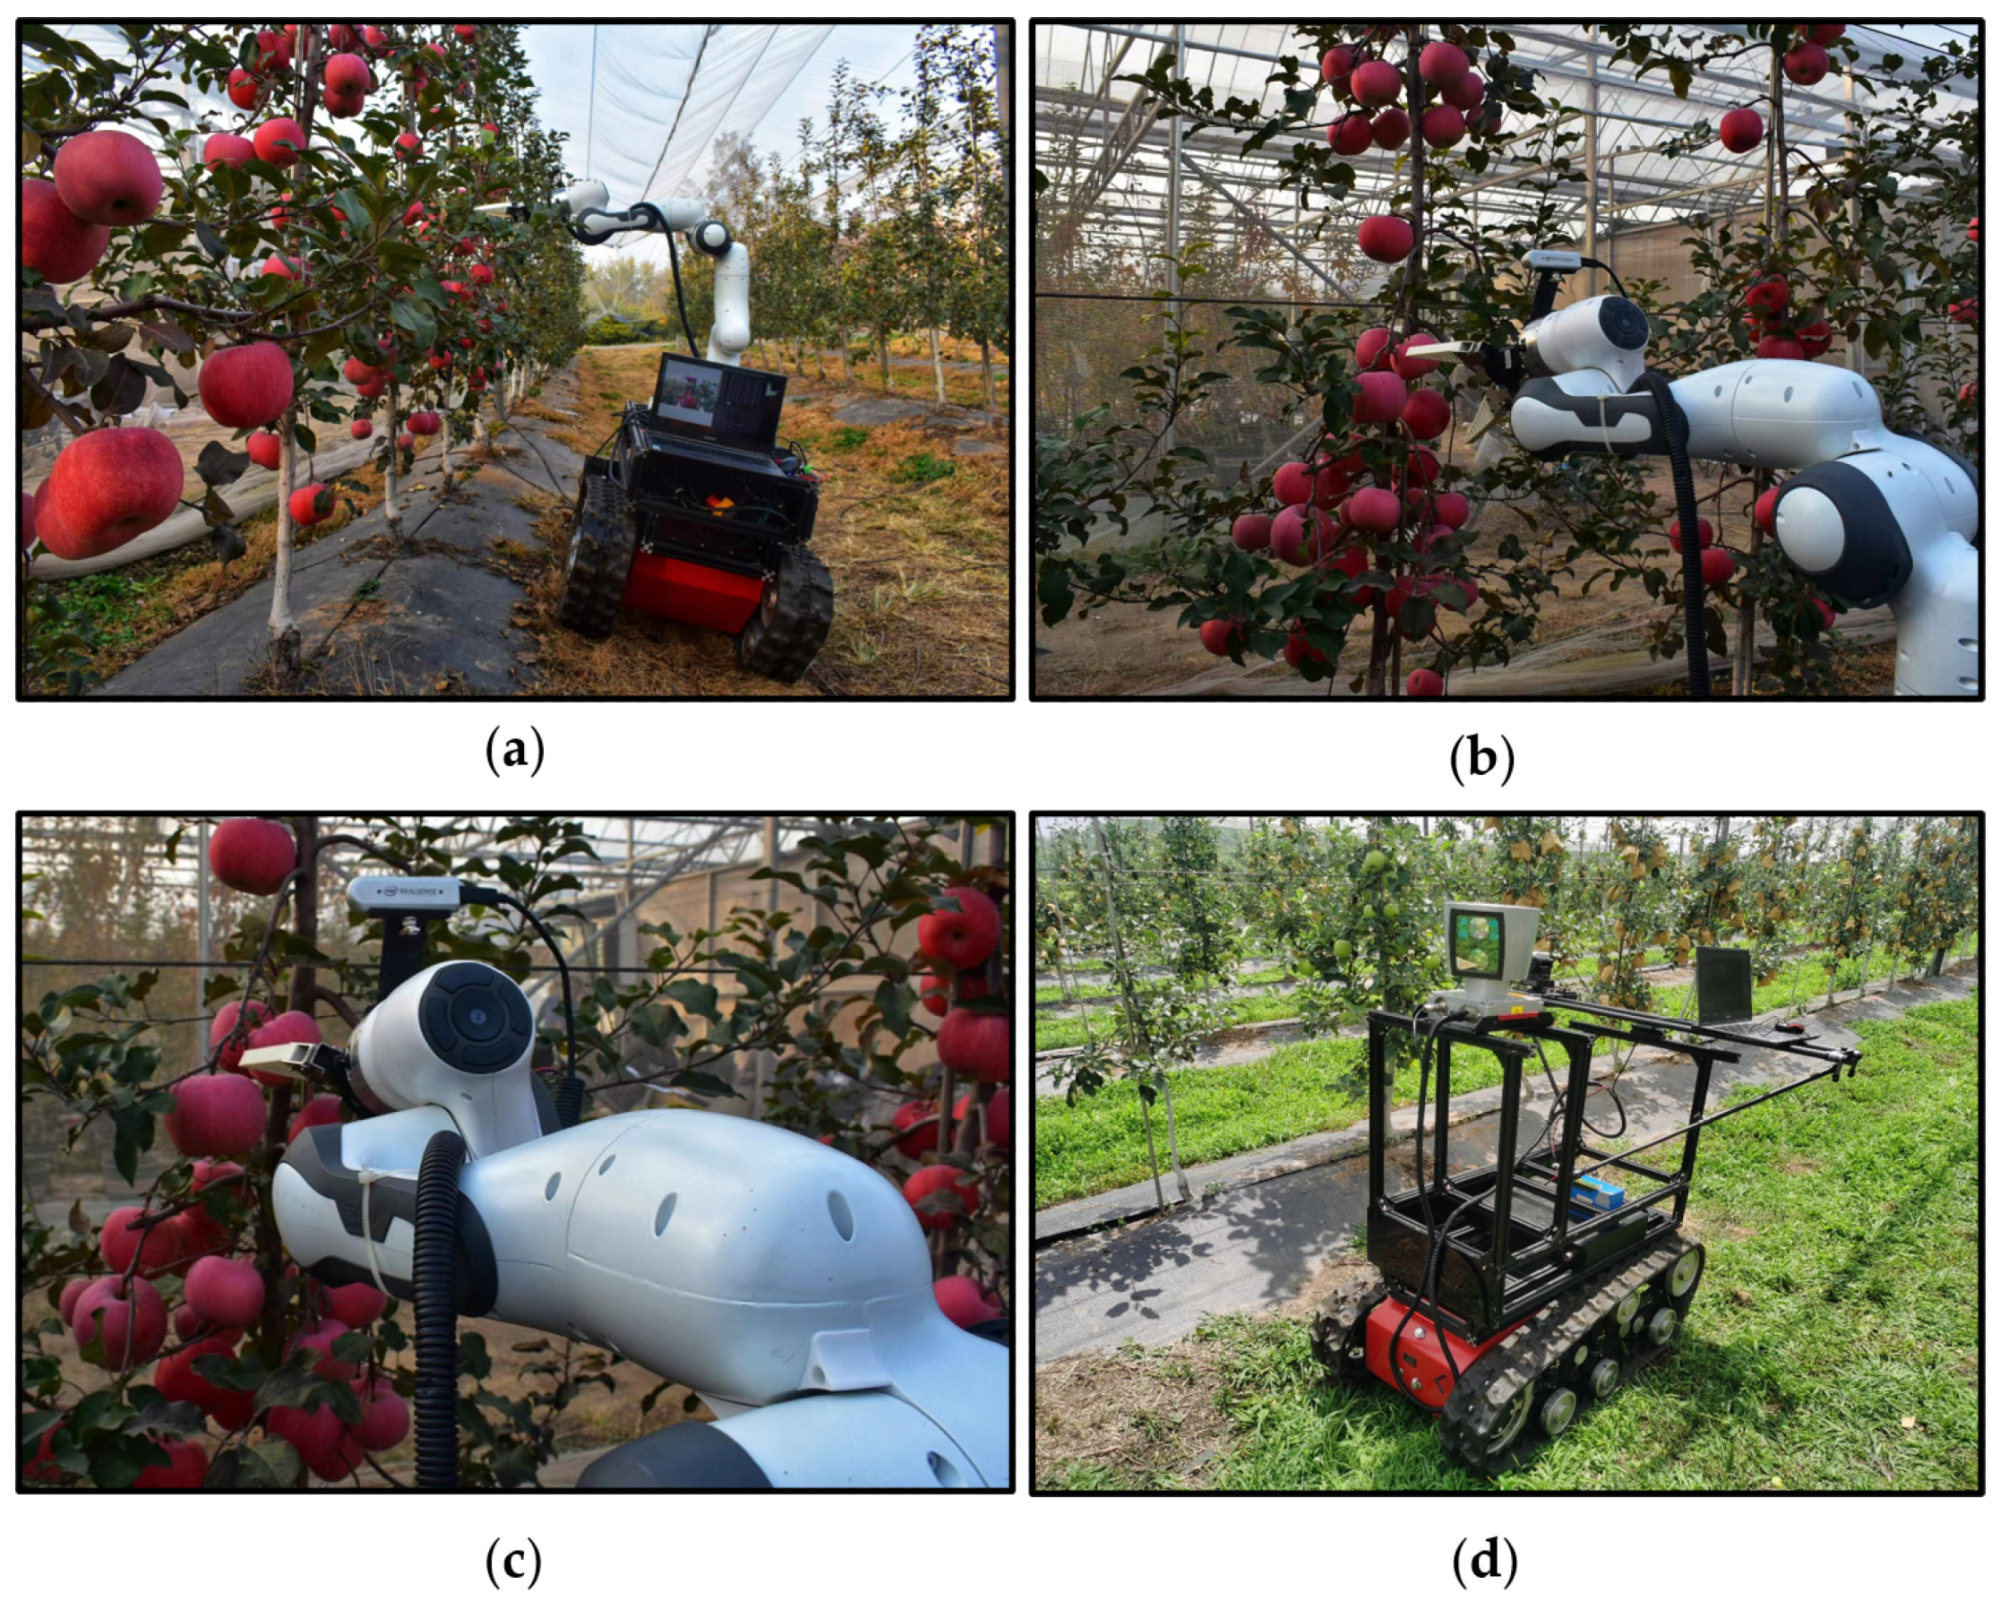 Hardware platform of the robotic system in the orchard experiments. (a–c) are the hardware platform of the robotic system; (d) is the verification platform with a Realsense D435i and a 64-line LiDAR to acquire the true values of fruits.